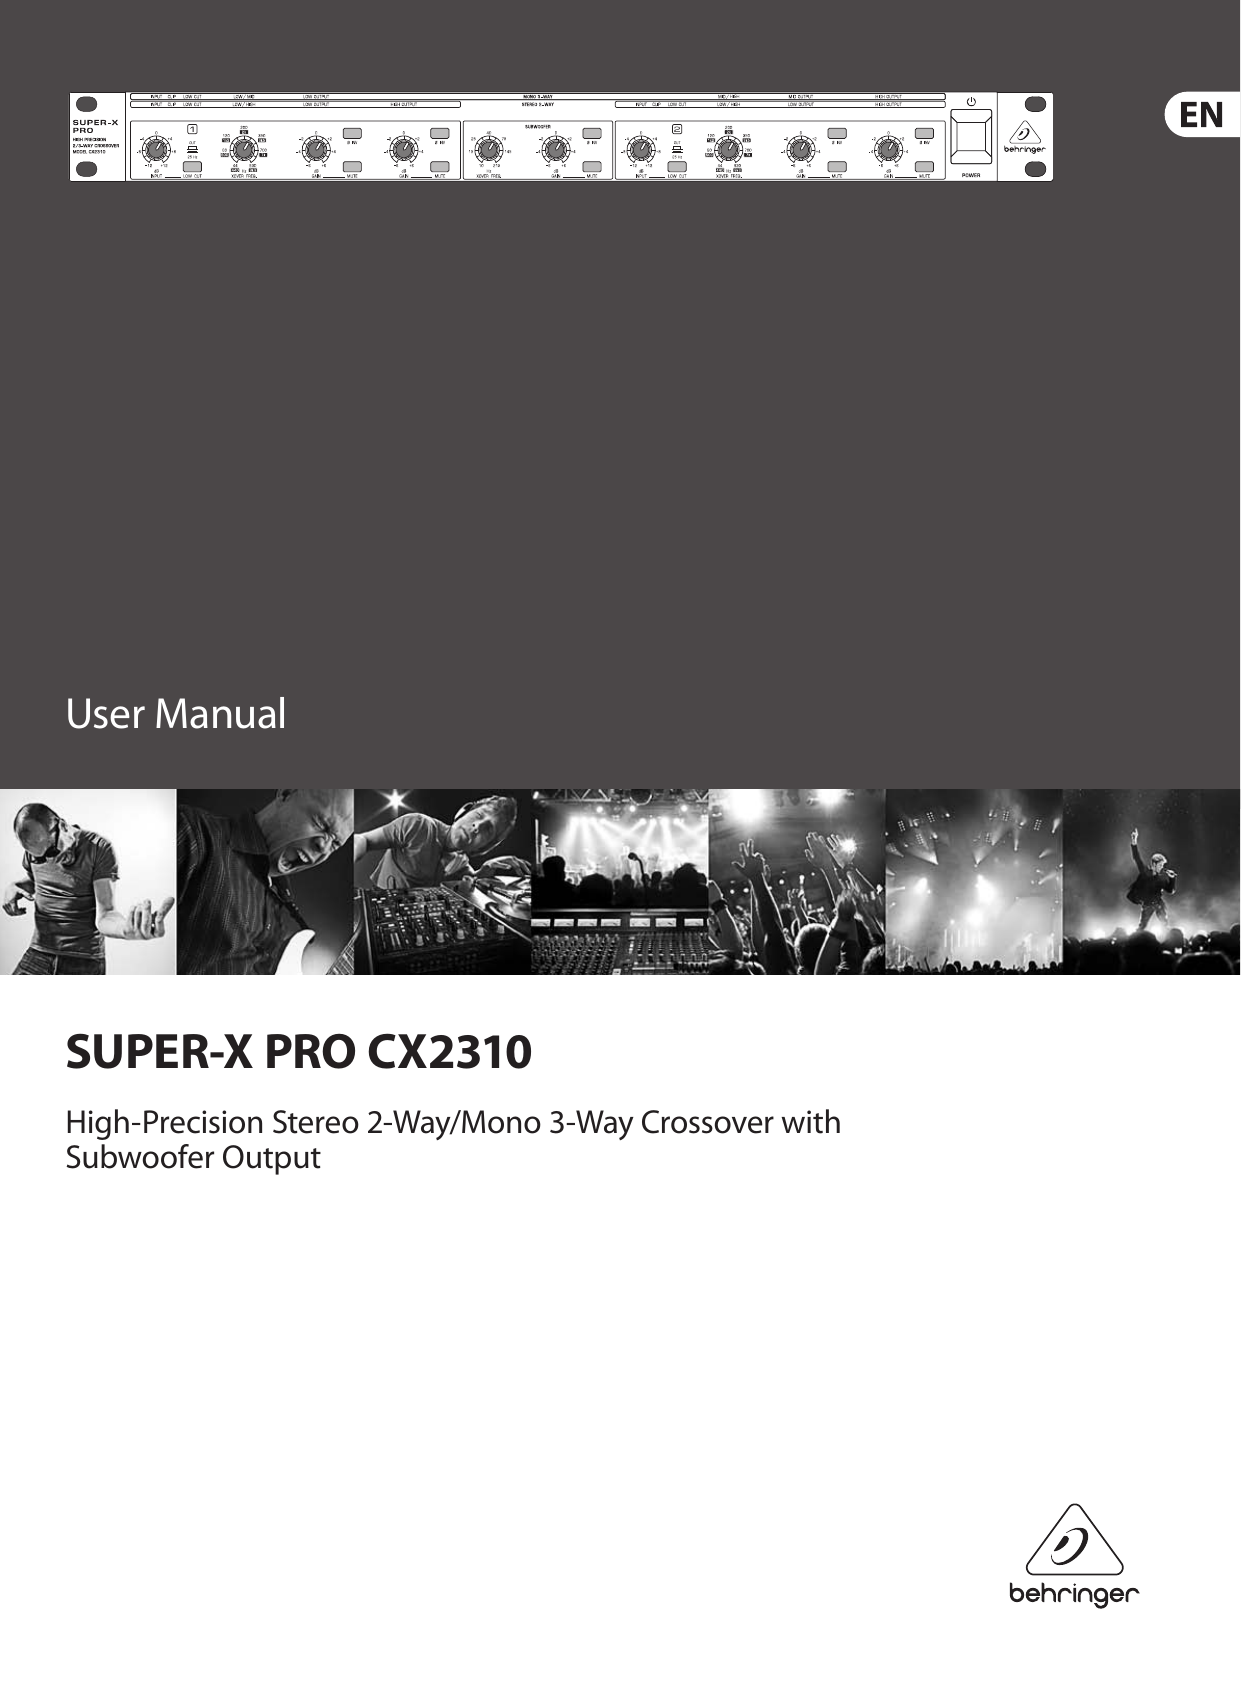 Page 1 of 10 - Behringer Behringer-Super-X-Pro-Cx2310-Users-Manual- SUPER-X PRO CX2310  Behringer-super-x-pro-cx2310-users-manual